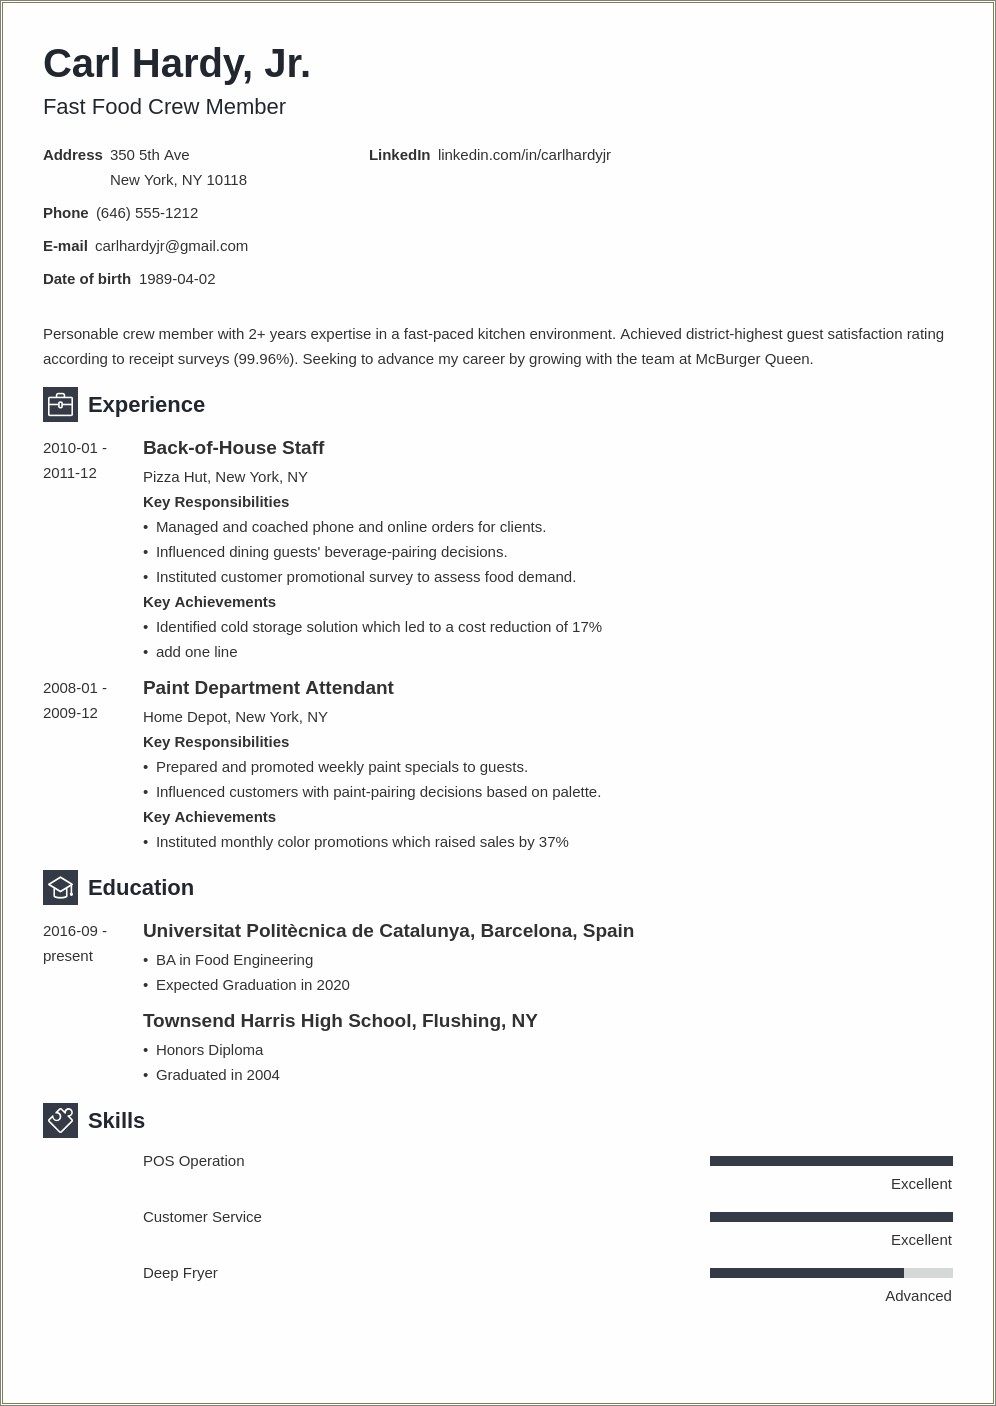 Fast Food Description For Resume Call